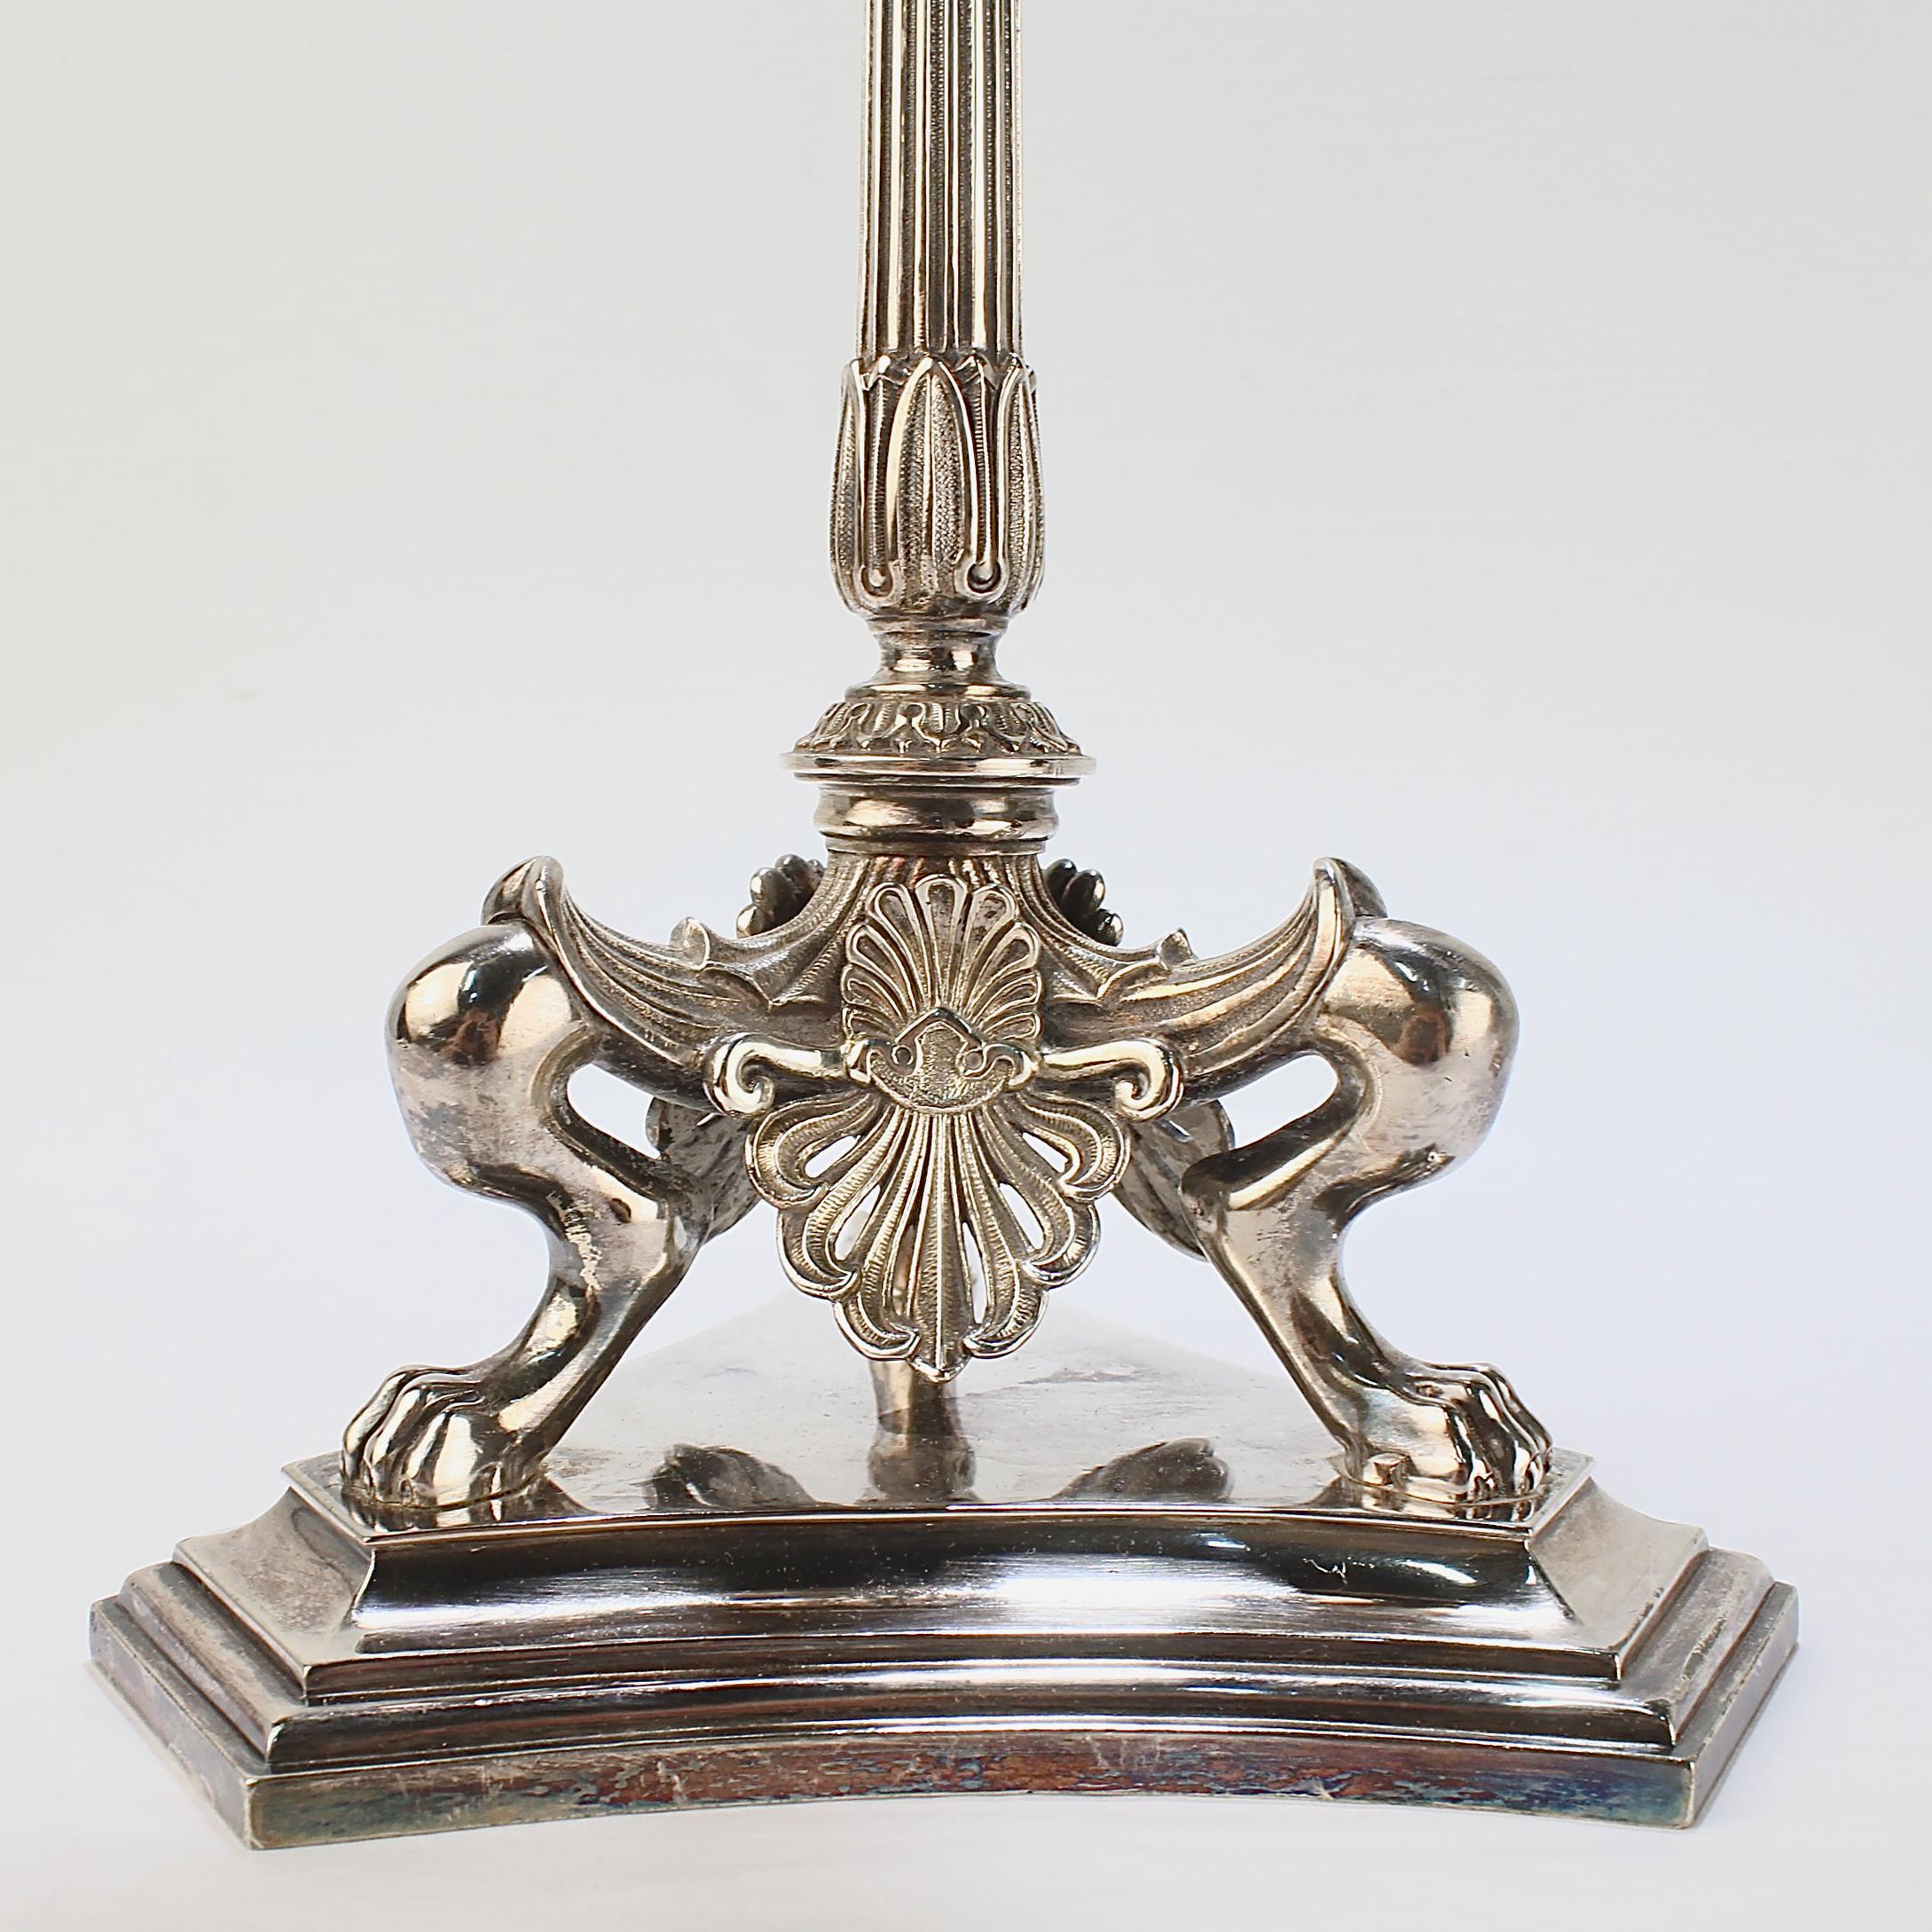 Pair of Elkington & Co Neoclassical Revival Silver Plated Five-Light Candelabra For Sale 1